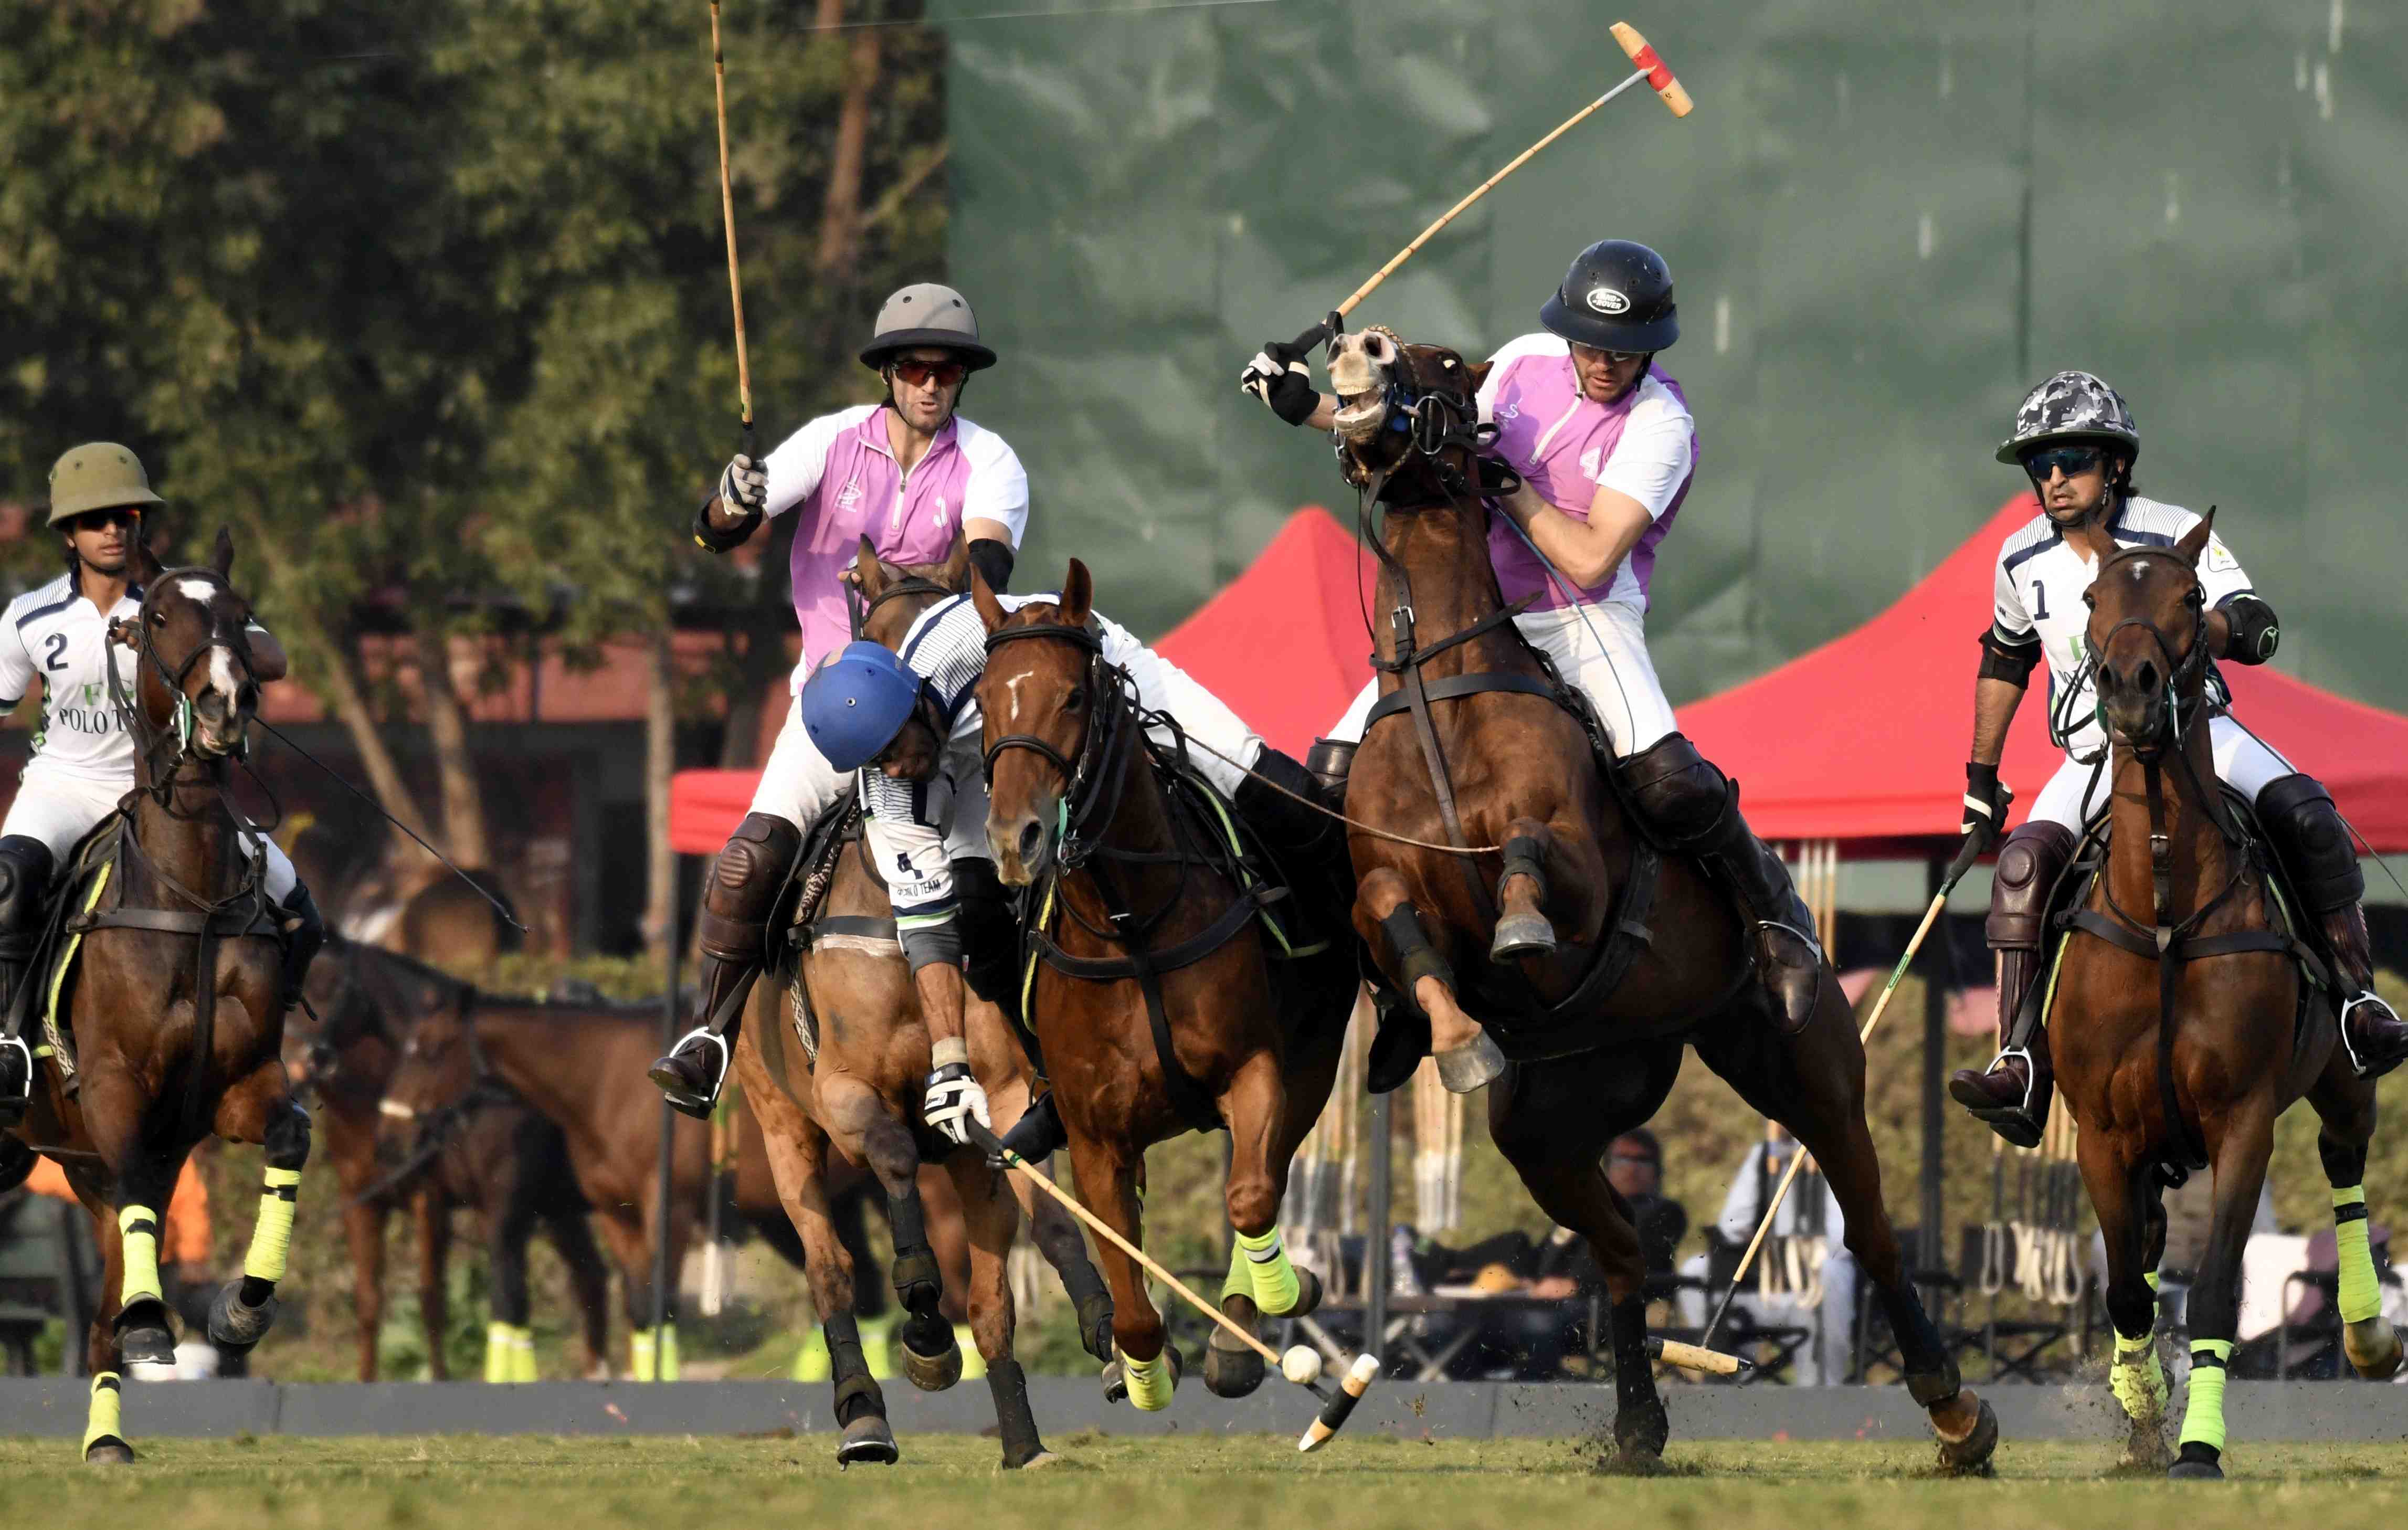 National Open Championship for Quaid Gold Cup: FG Polo win opener